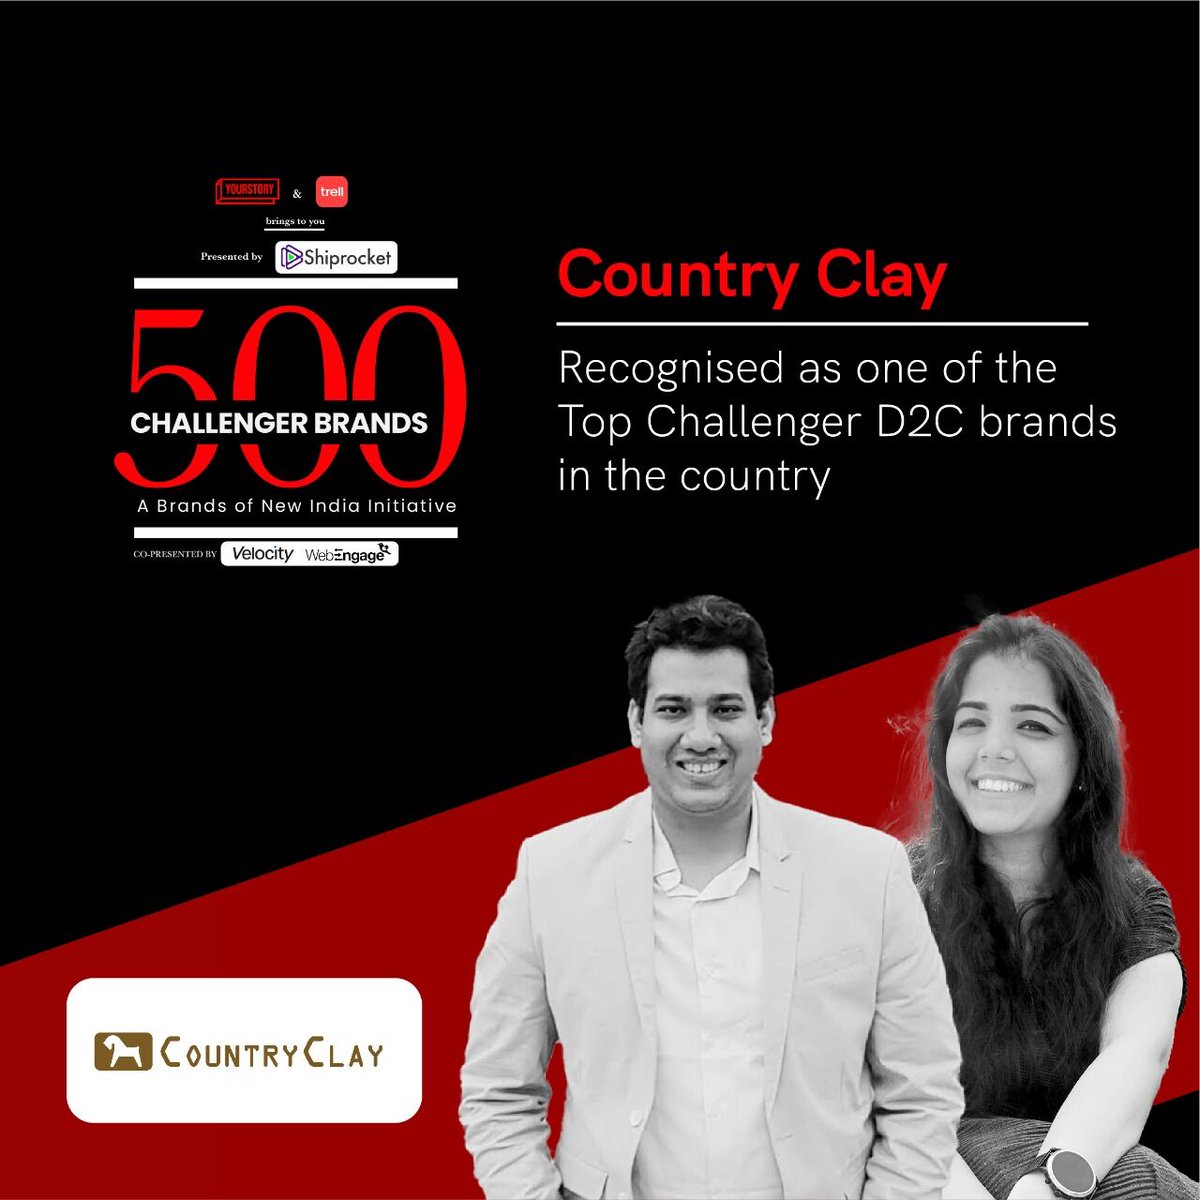 Country Clay is excited to be selected for @YourStoryCo 500 Challenger Brands. :)

#yourstory #yourstorymatters #yourstorymatters #startup #startupindia #startups #supportsmallbusiness #supportlocal #vocalforlocal #pottery #potter #bathing #bathingessentials #bathaccessories